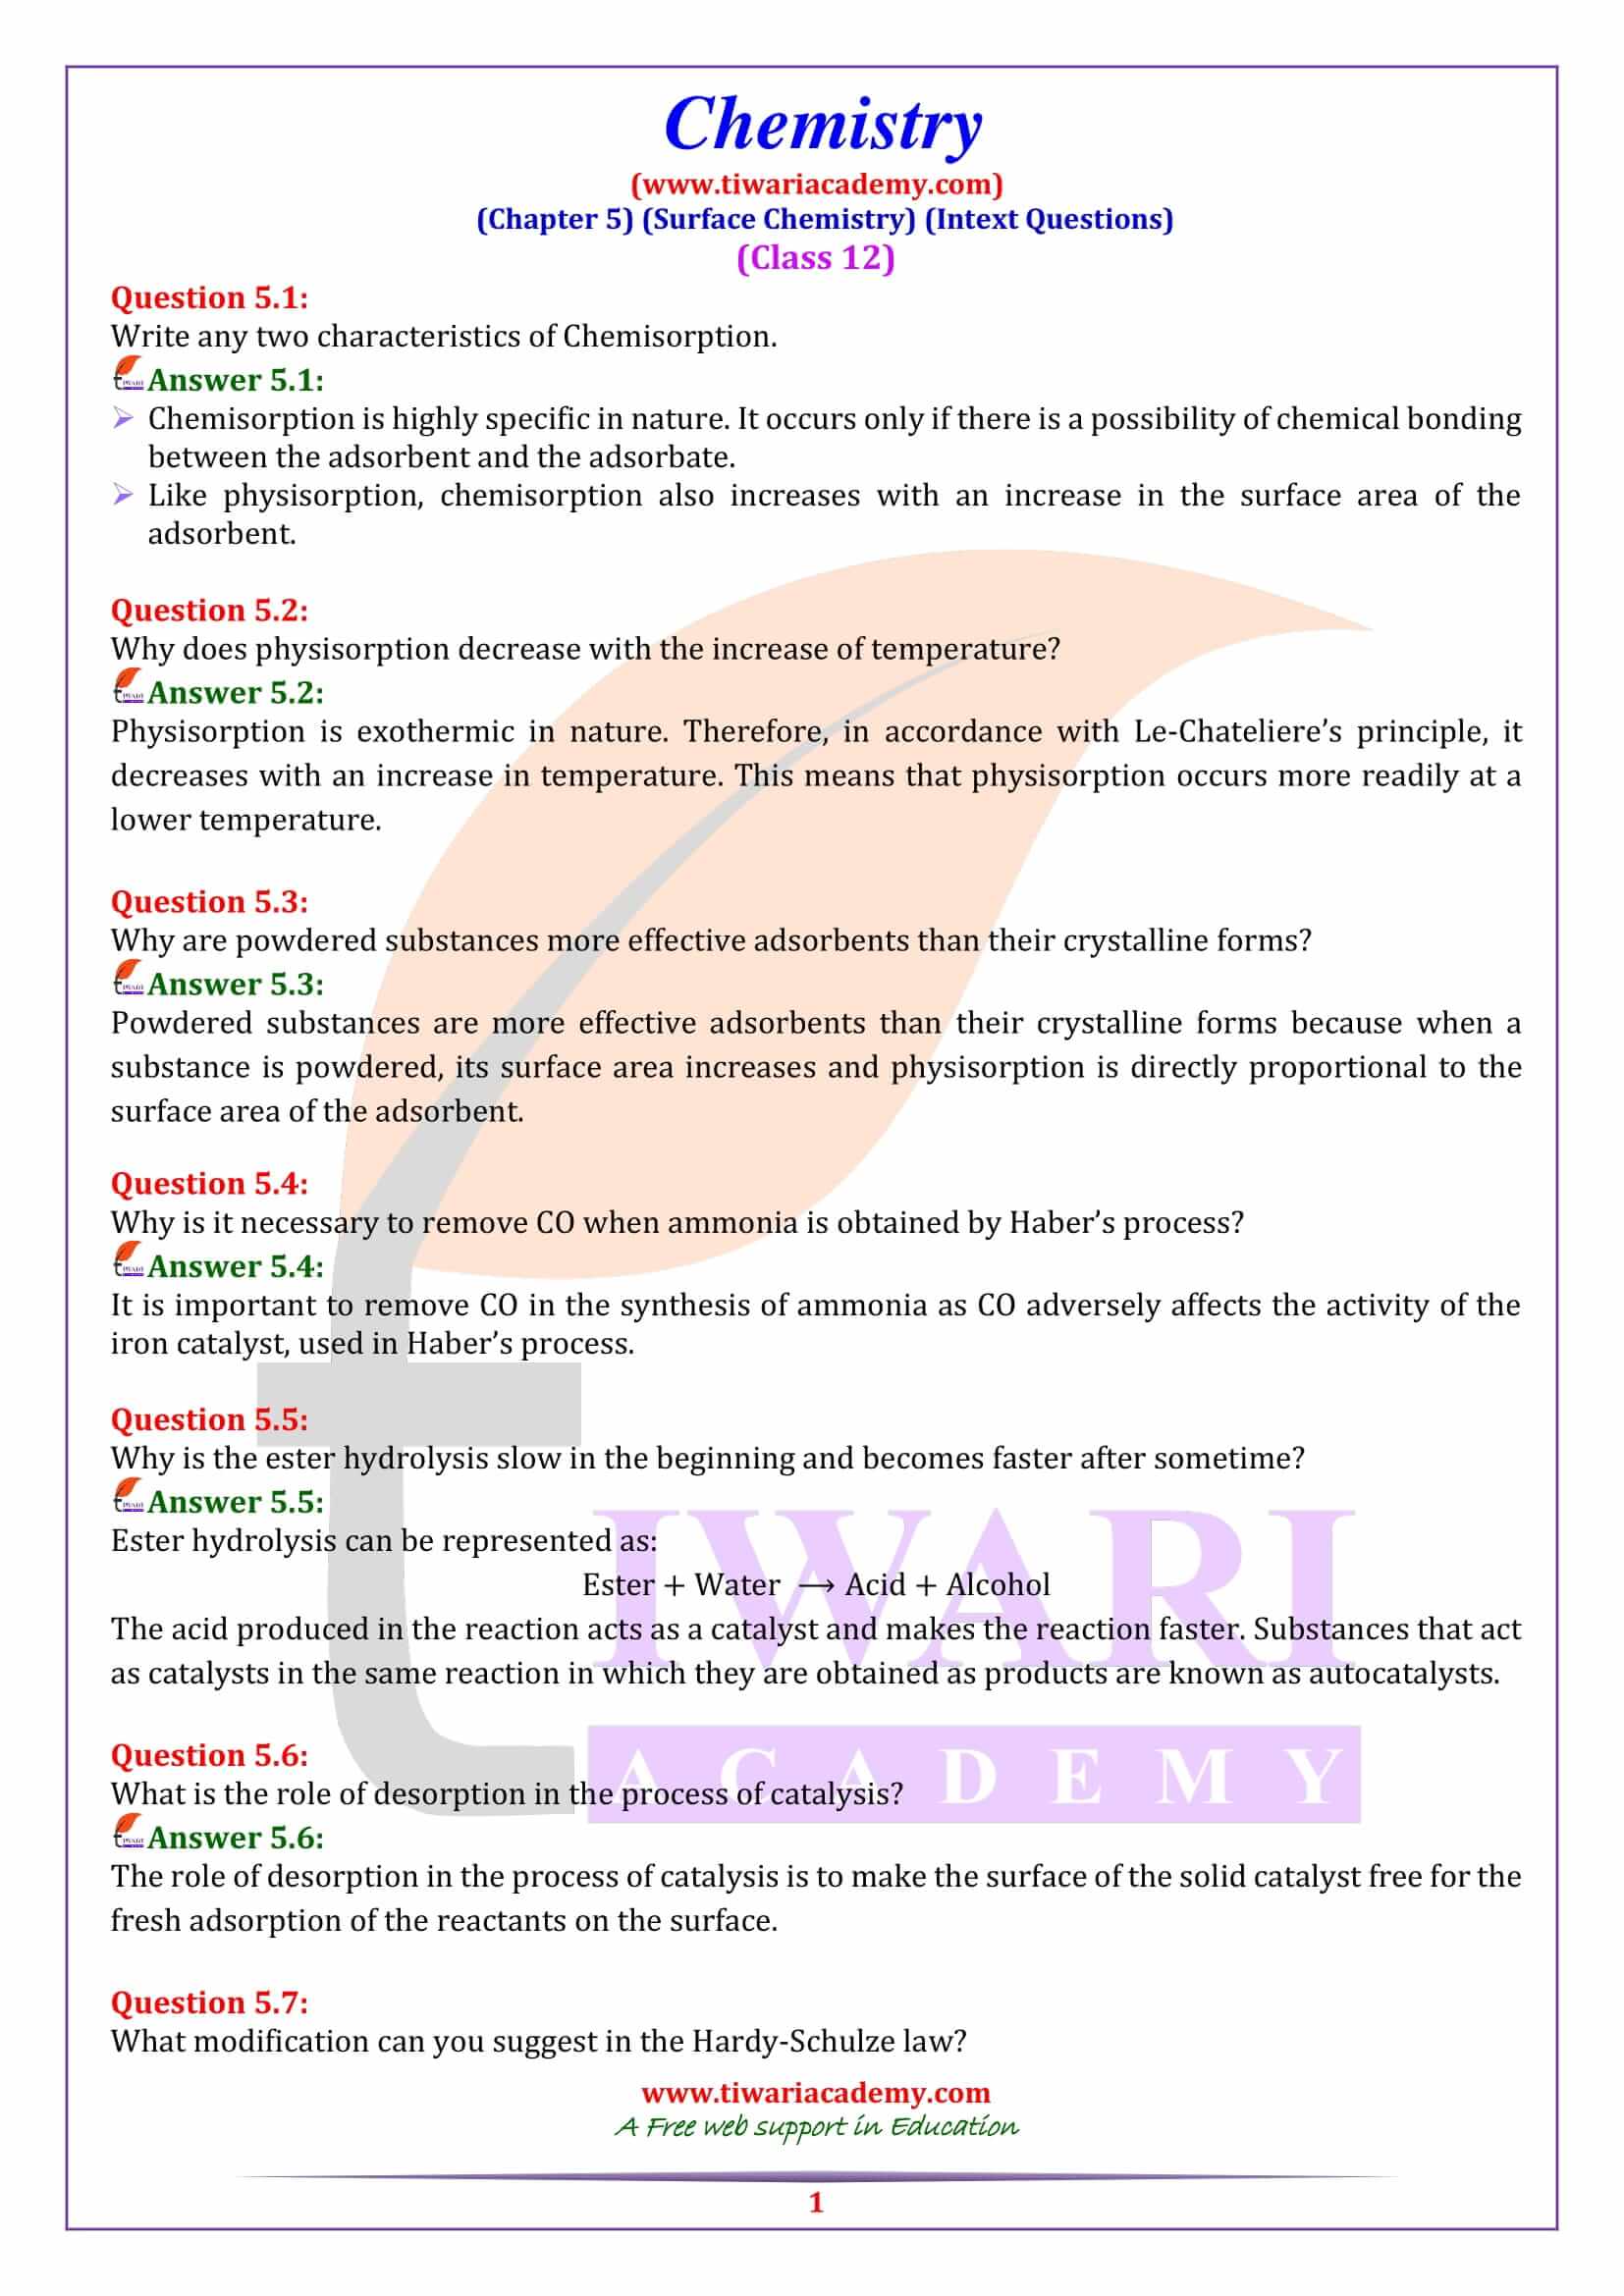 NCERT Solutions for Class 12 Chemistry Chapter 5 Intext answers